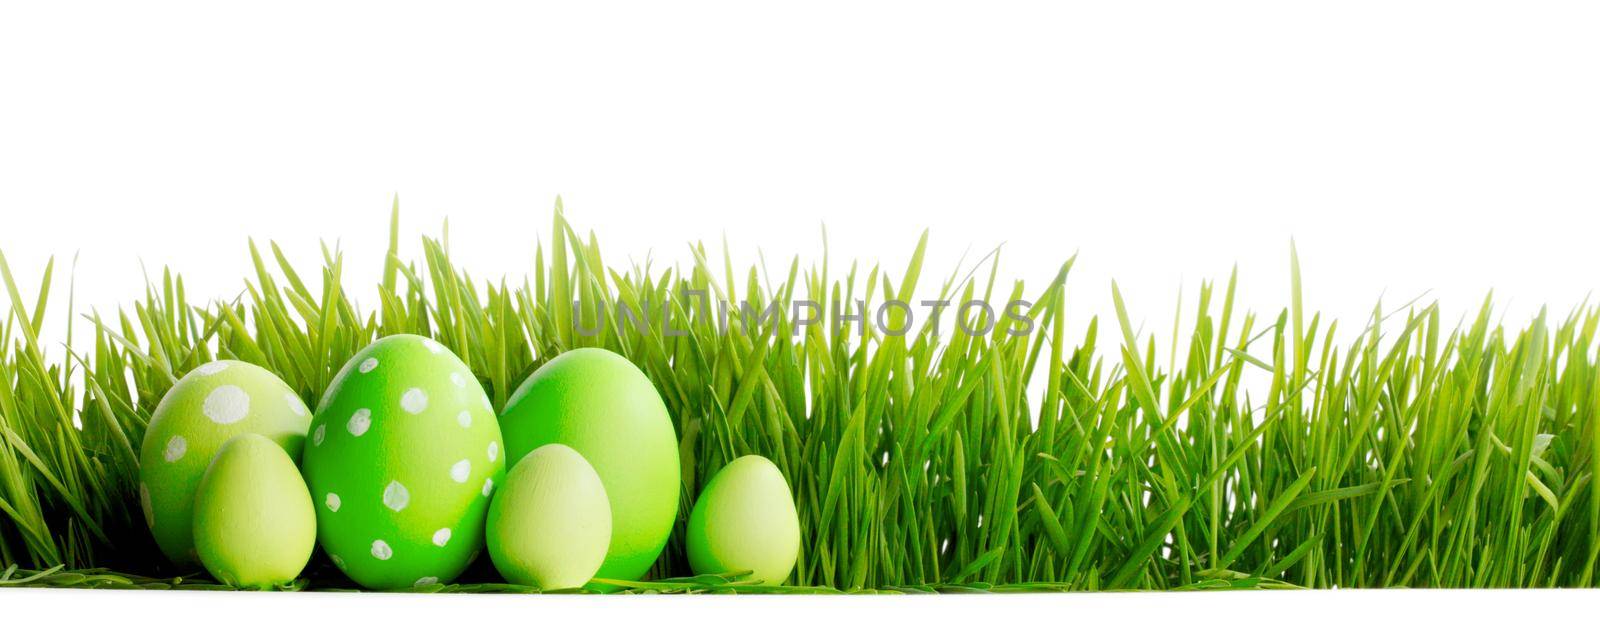 Row of green Easter Eggs in fresh green grass isolated on white background